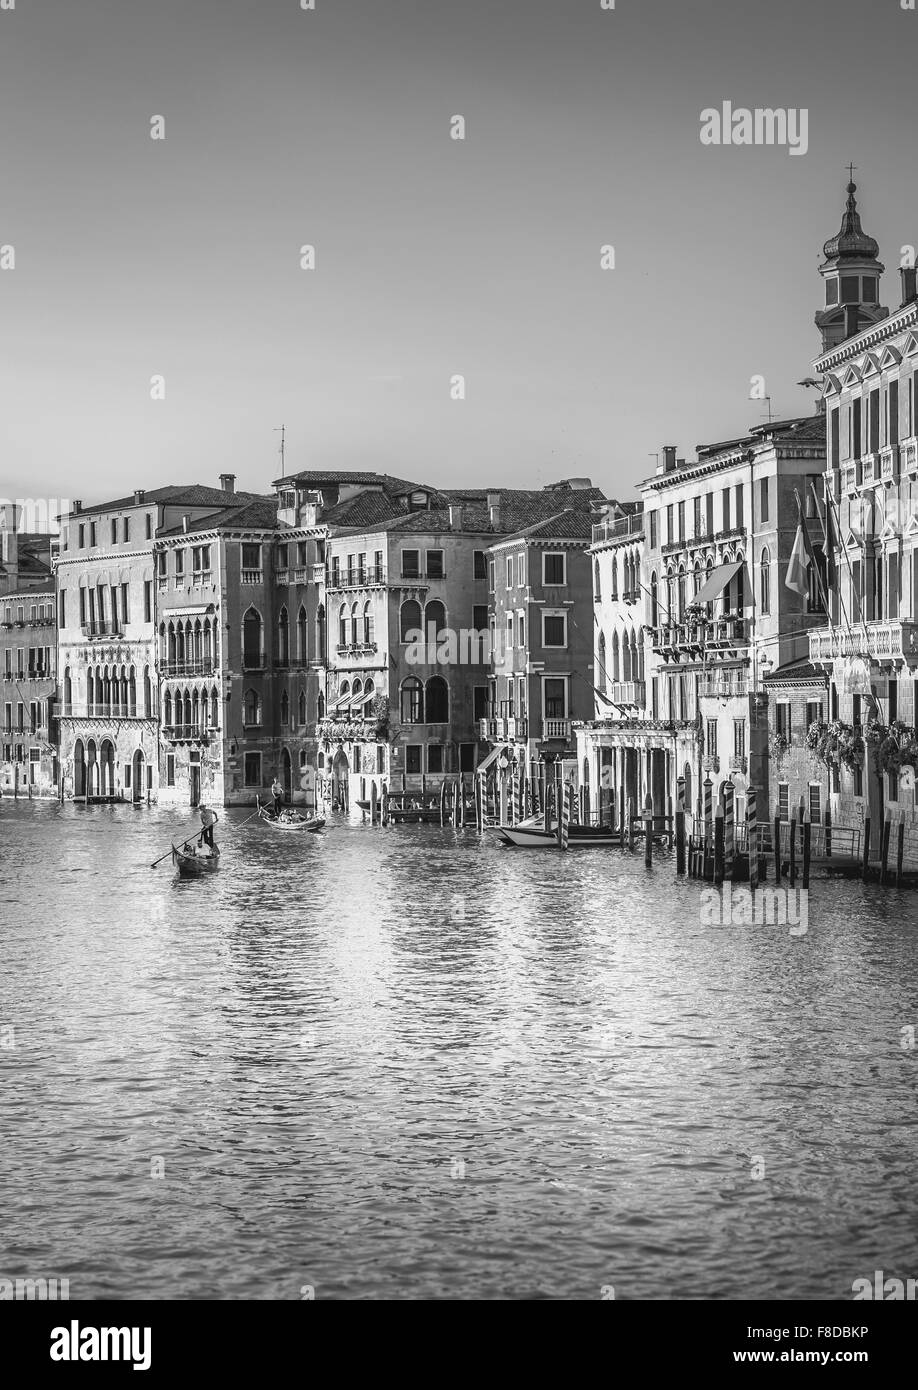 VENICE, ITALY - JUNE 28, 2015: Black and white Grand Canal with gondolas in antique Venice, Italy Stock Photo